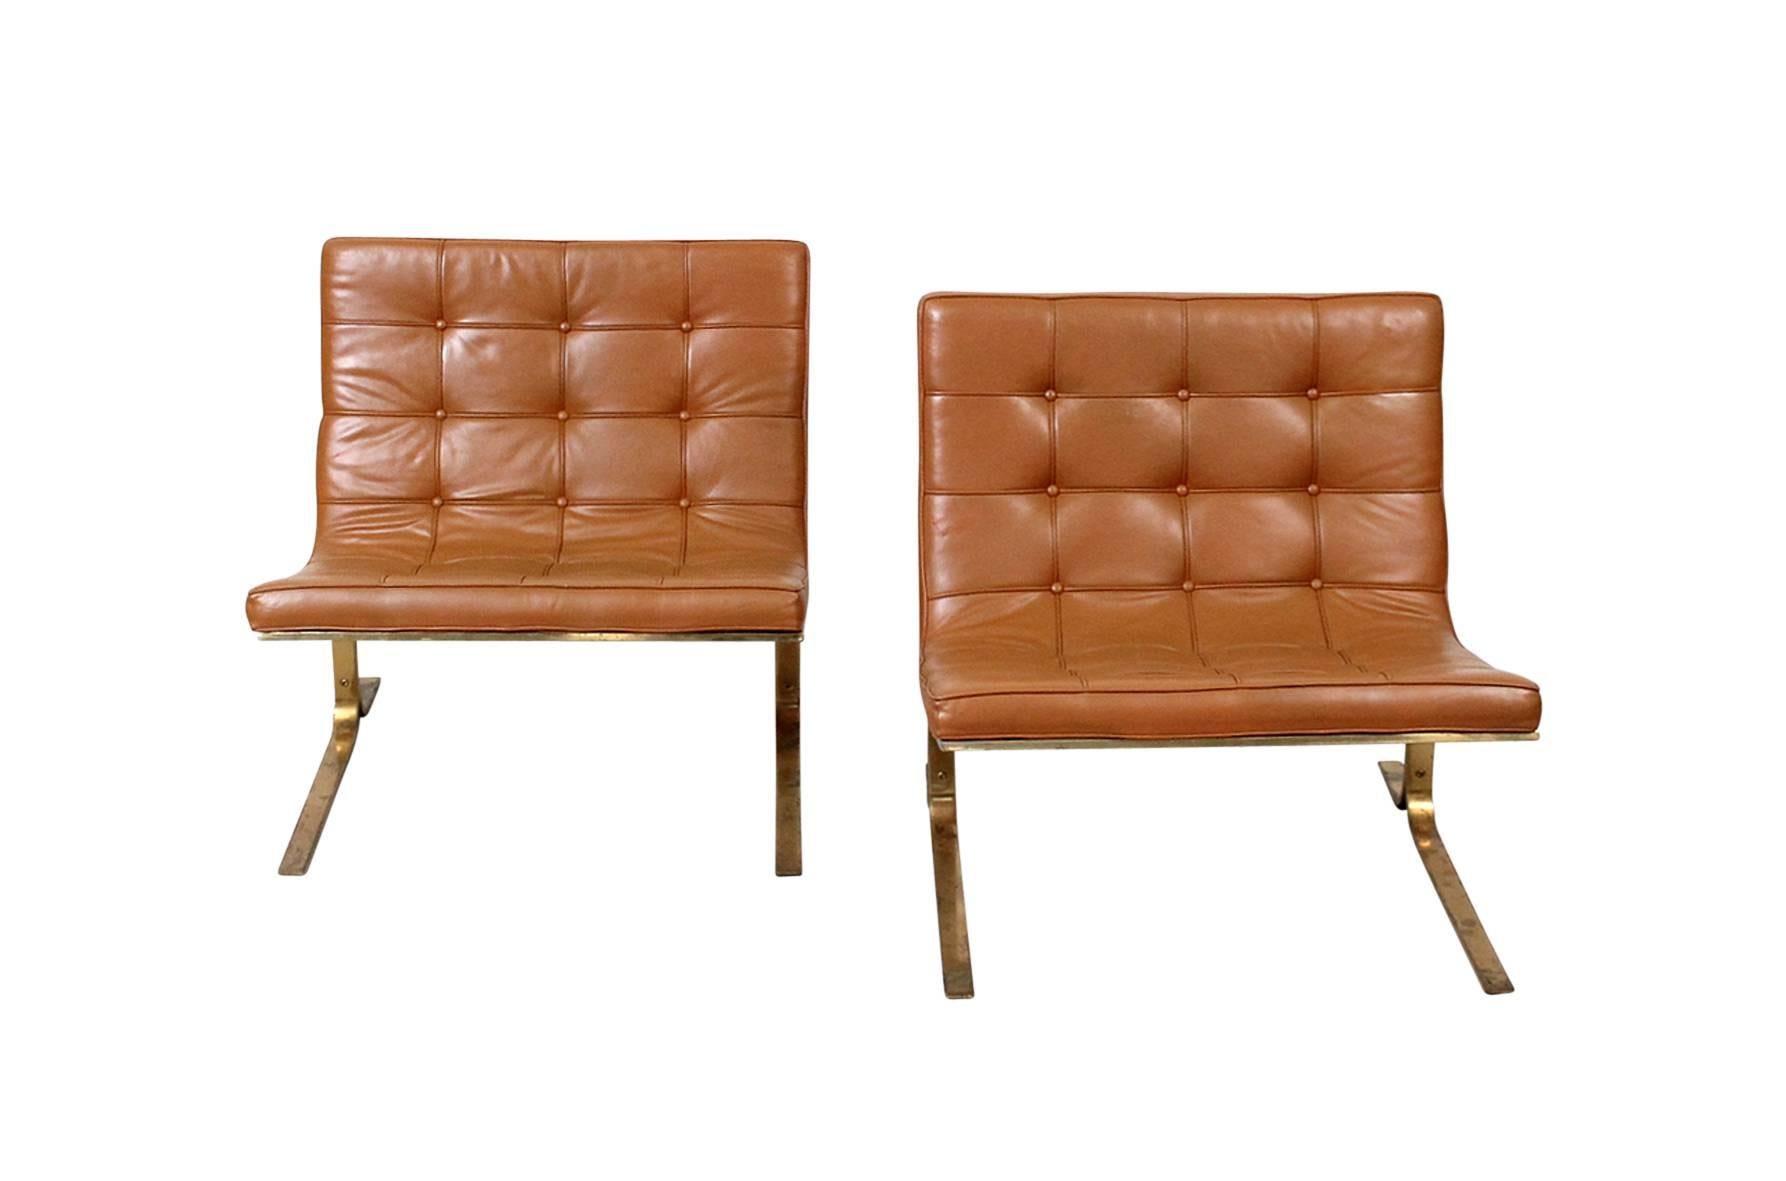 Tufted brown leather CH28 lounge chair with cantilevered bronze finish bases designed by Nicos Zographos. Designed by Zographos while working at Skidmore, Owens and Merrill, circa 1960. Very minimal and chic design.

We can have the frames